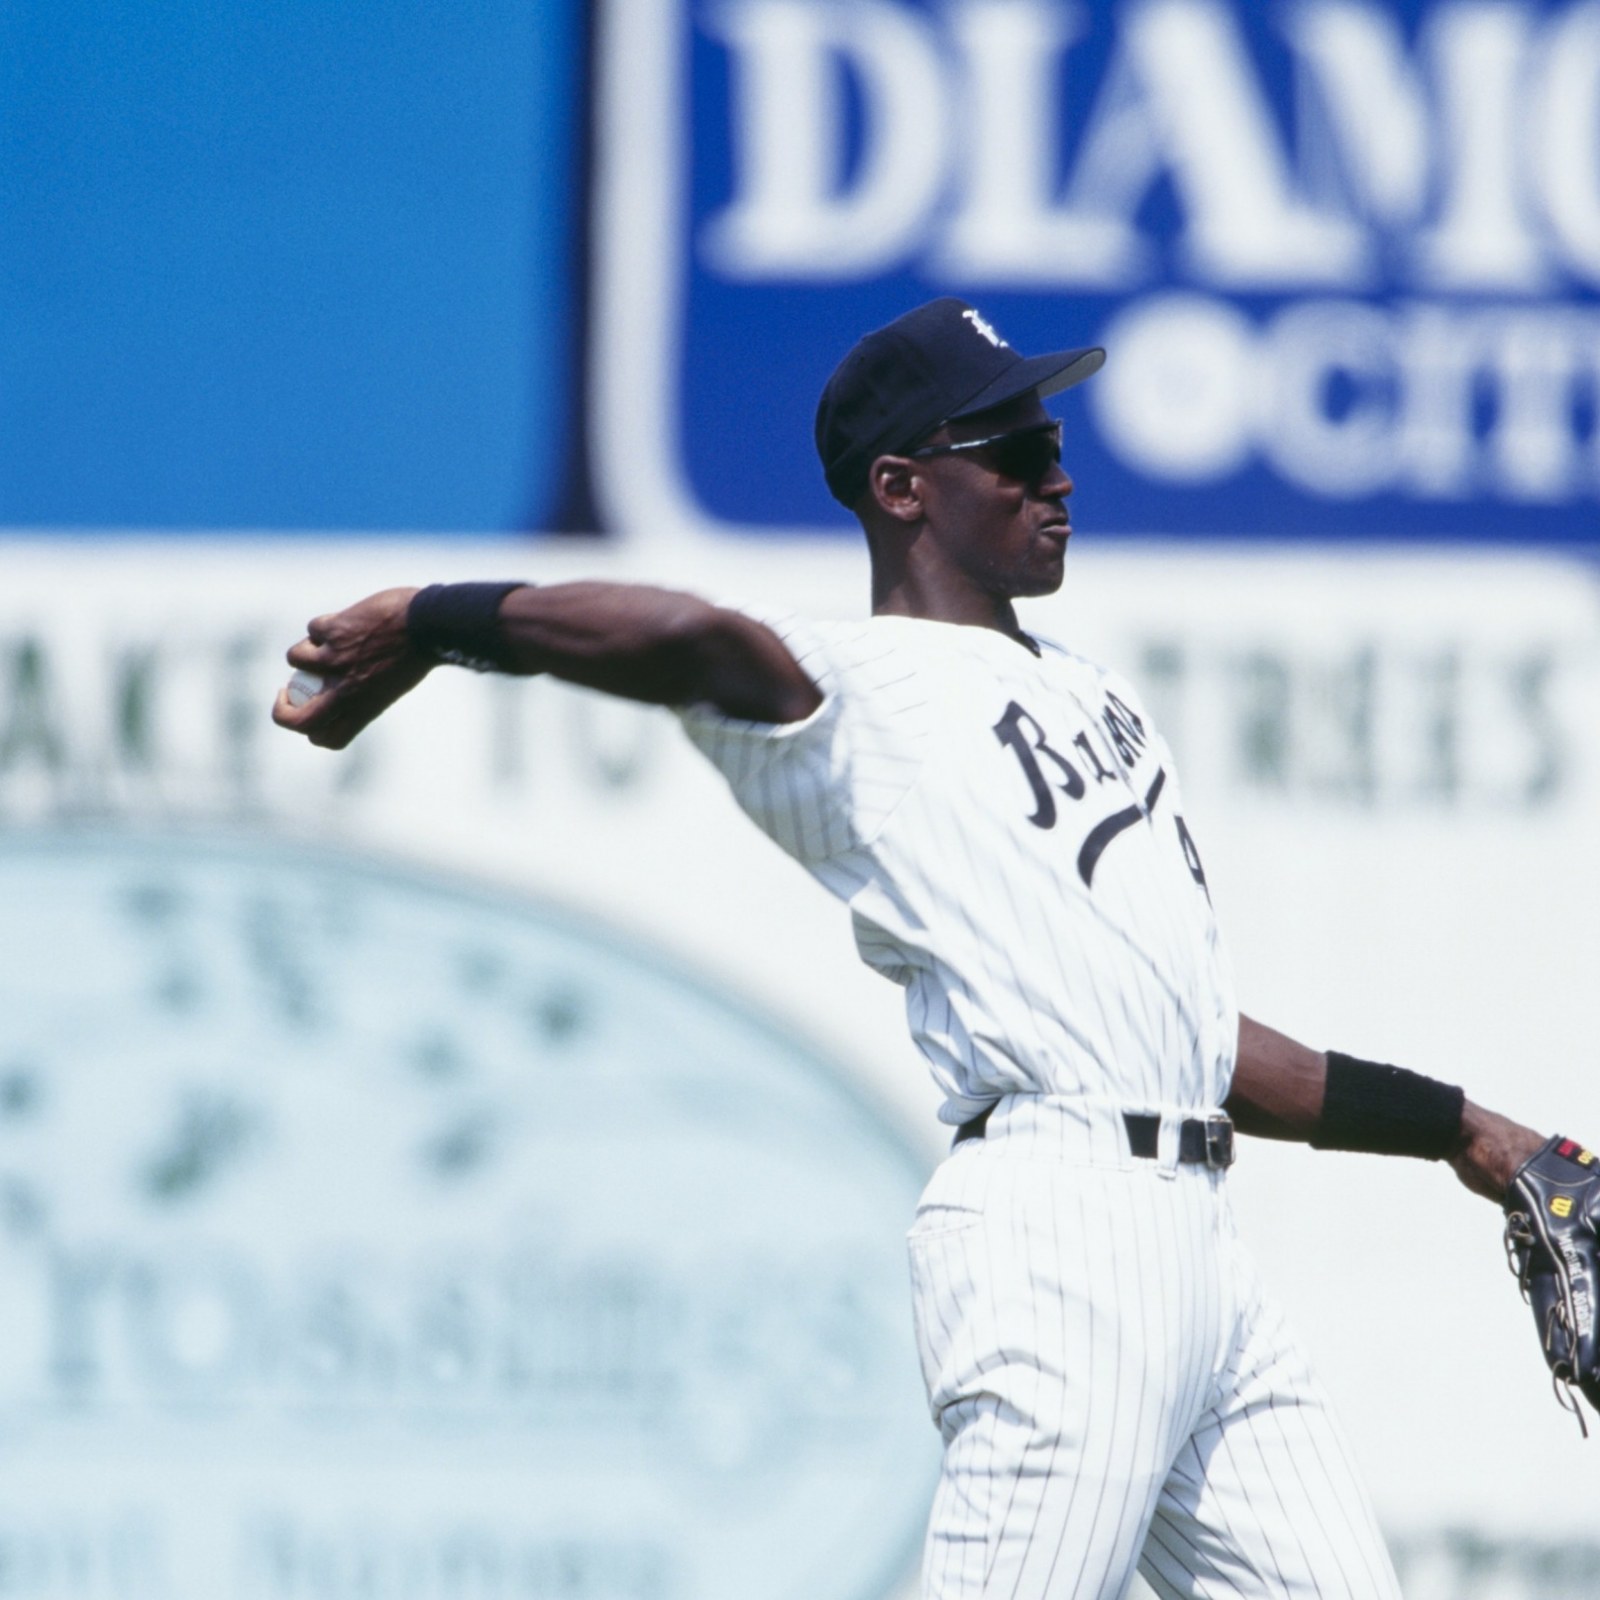 Michael Jordan Baseball Career and Highlights in Star's Two Years Away From the Chicago Bulls